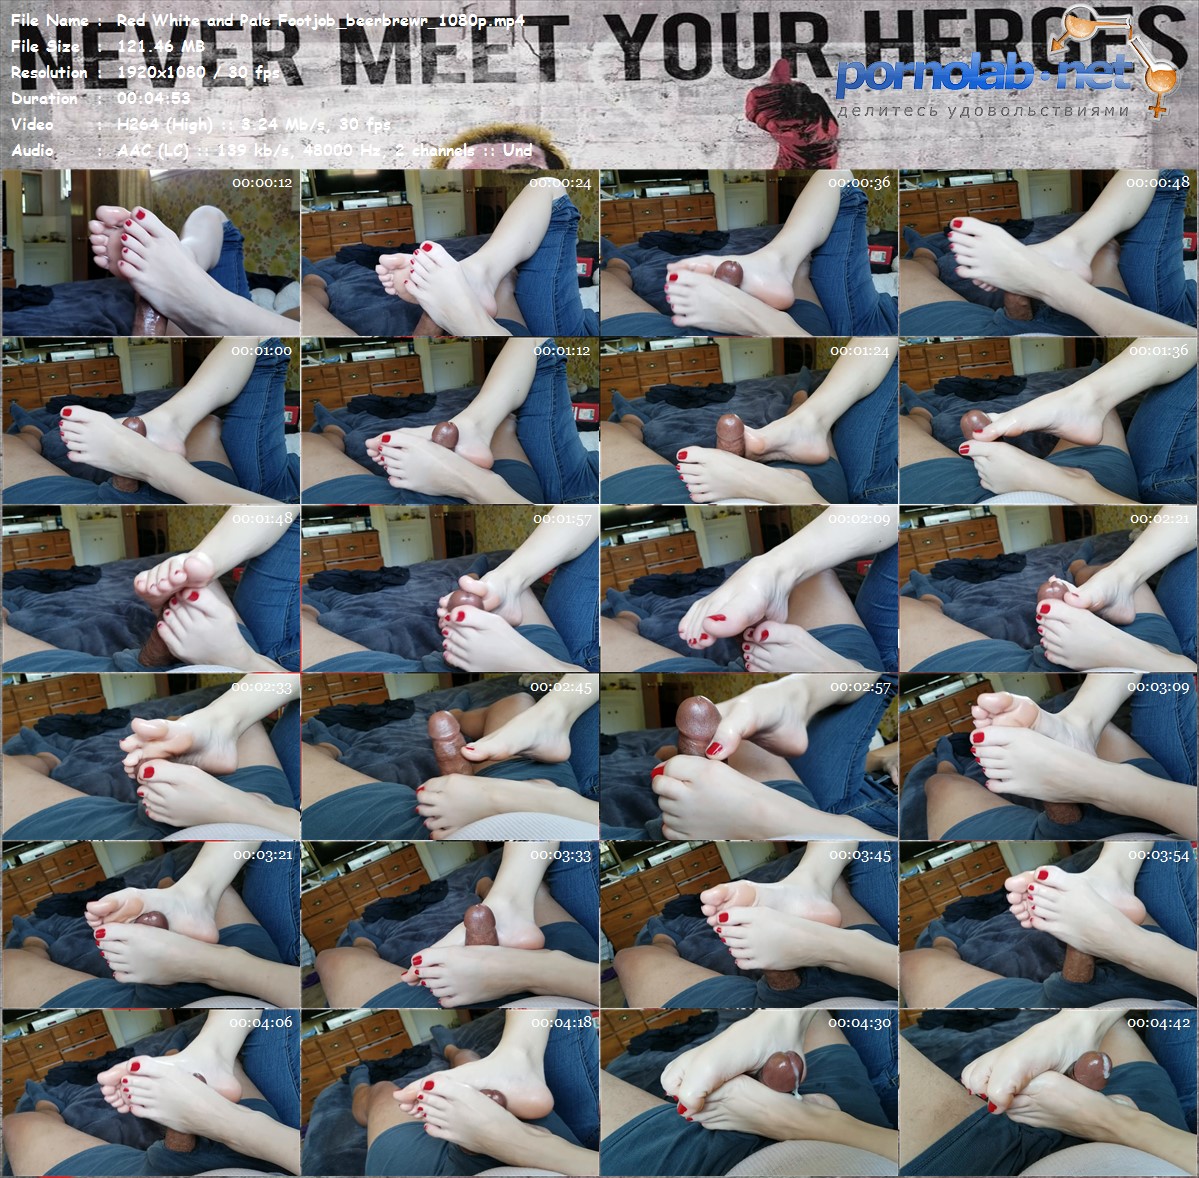 Red White and Pale Footjob beerbrewr 1080 p mp 4